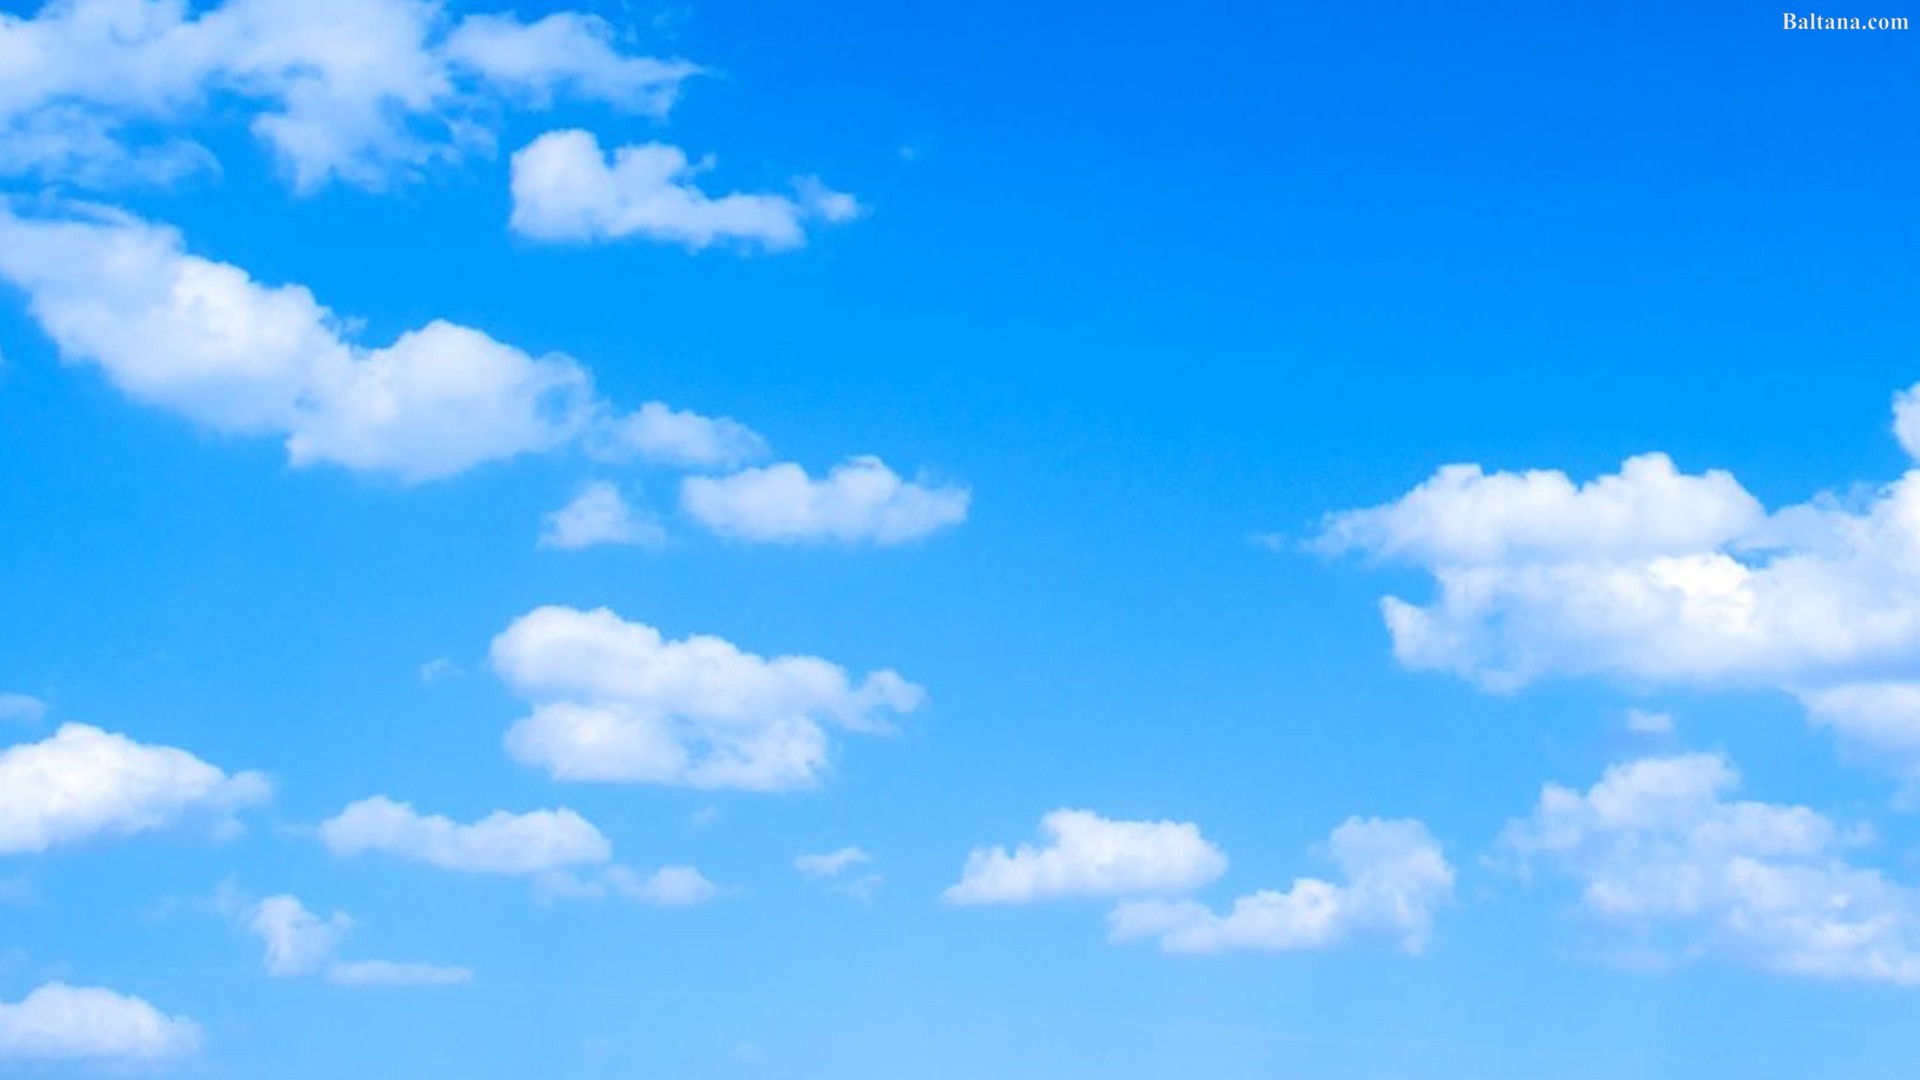 Free download Clouds Wallpapers HD Backgrounds Images Pics Photos